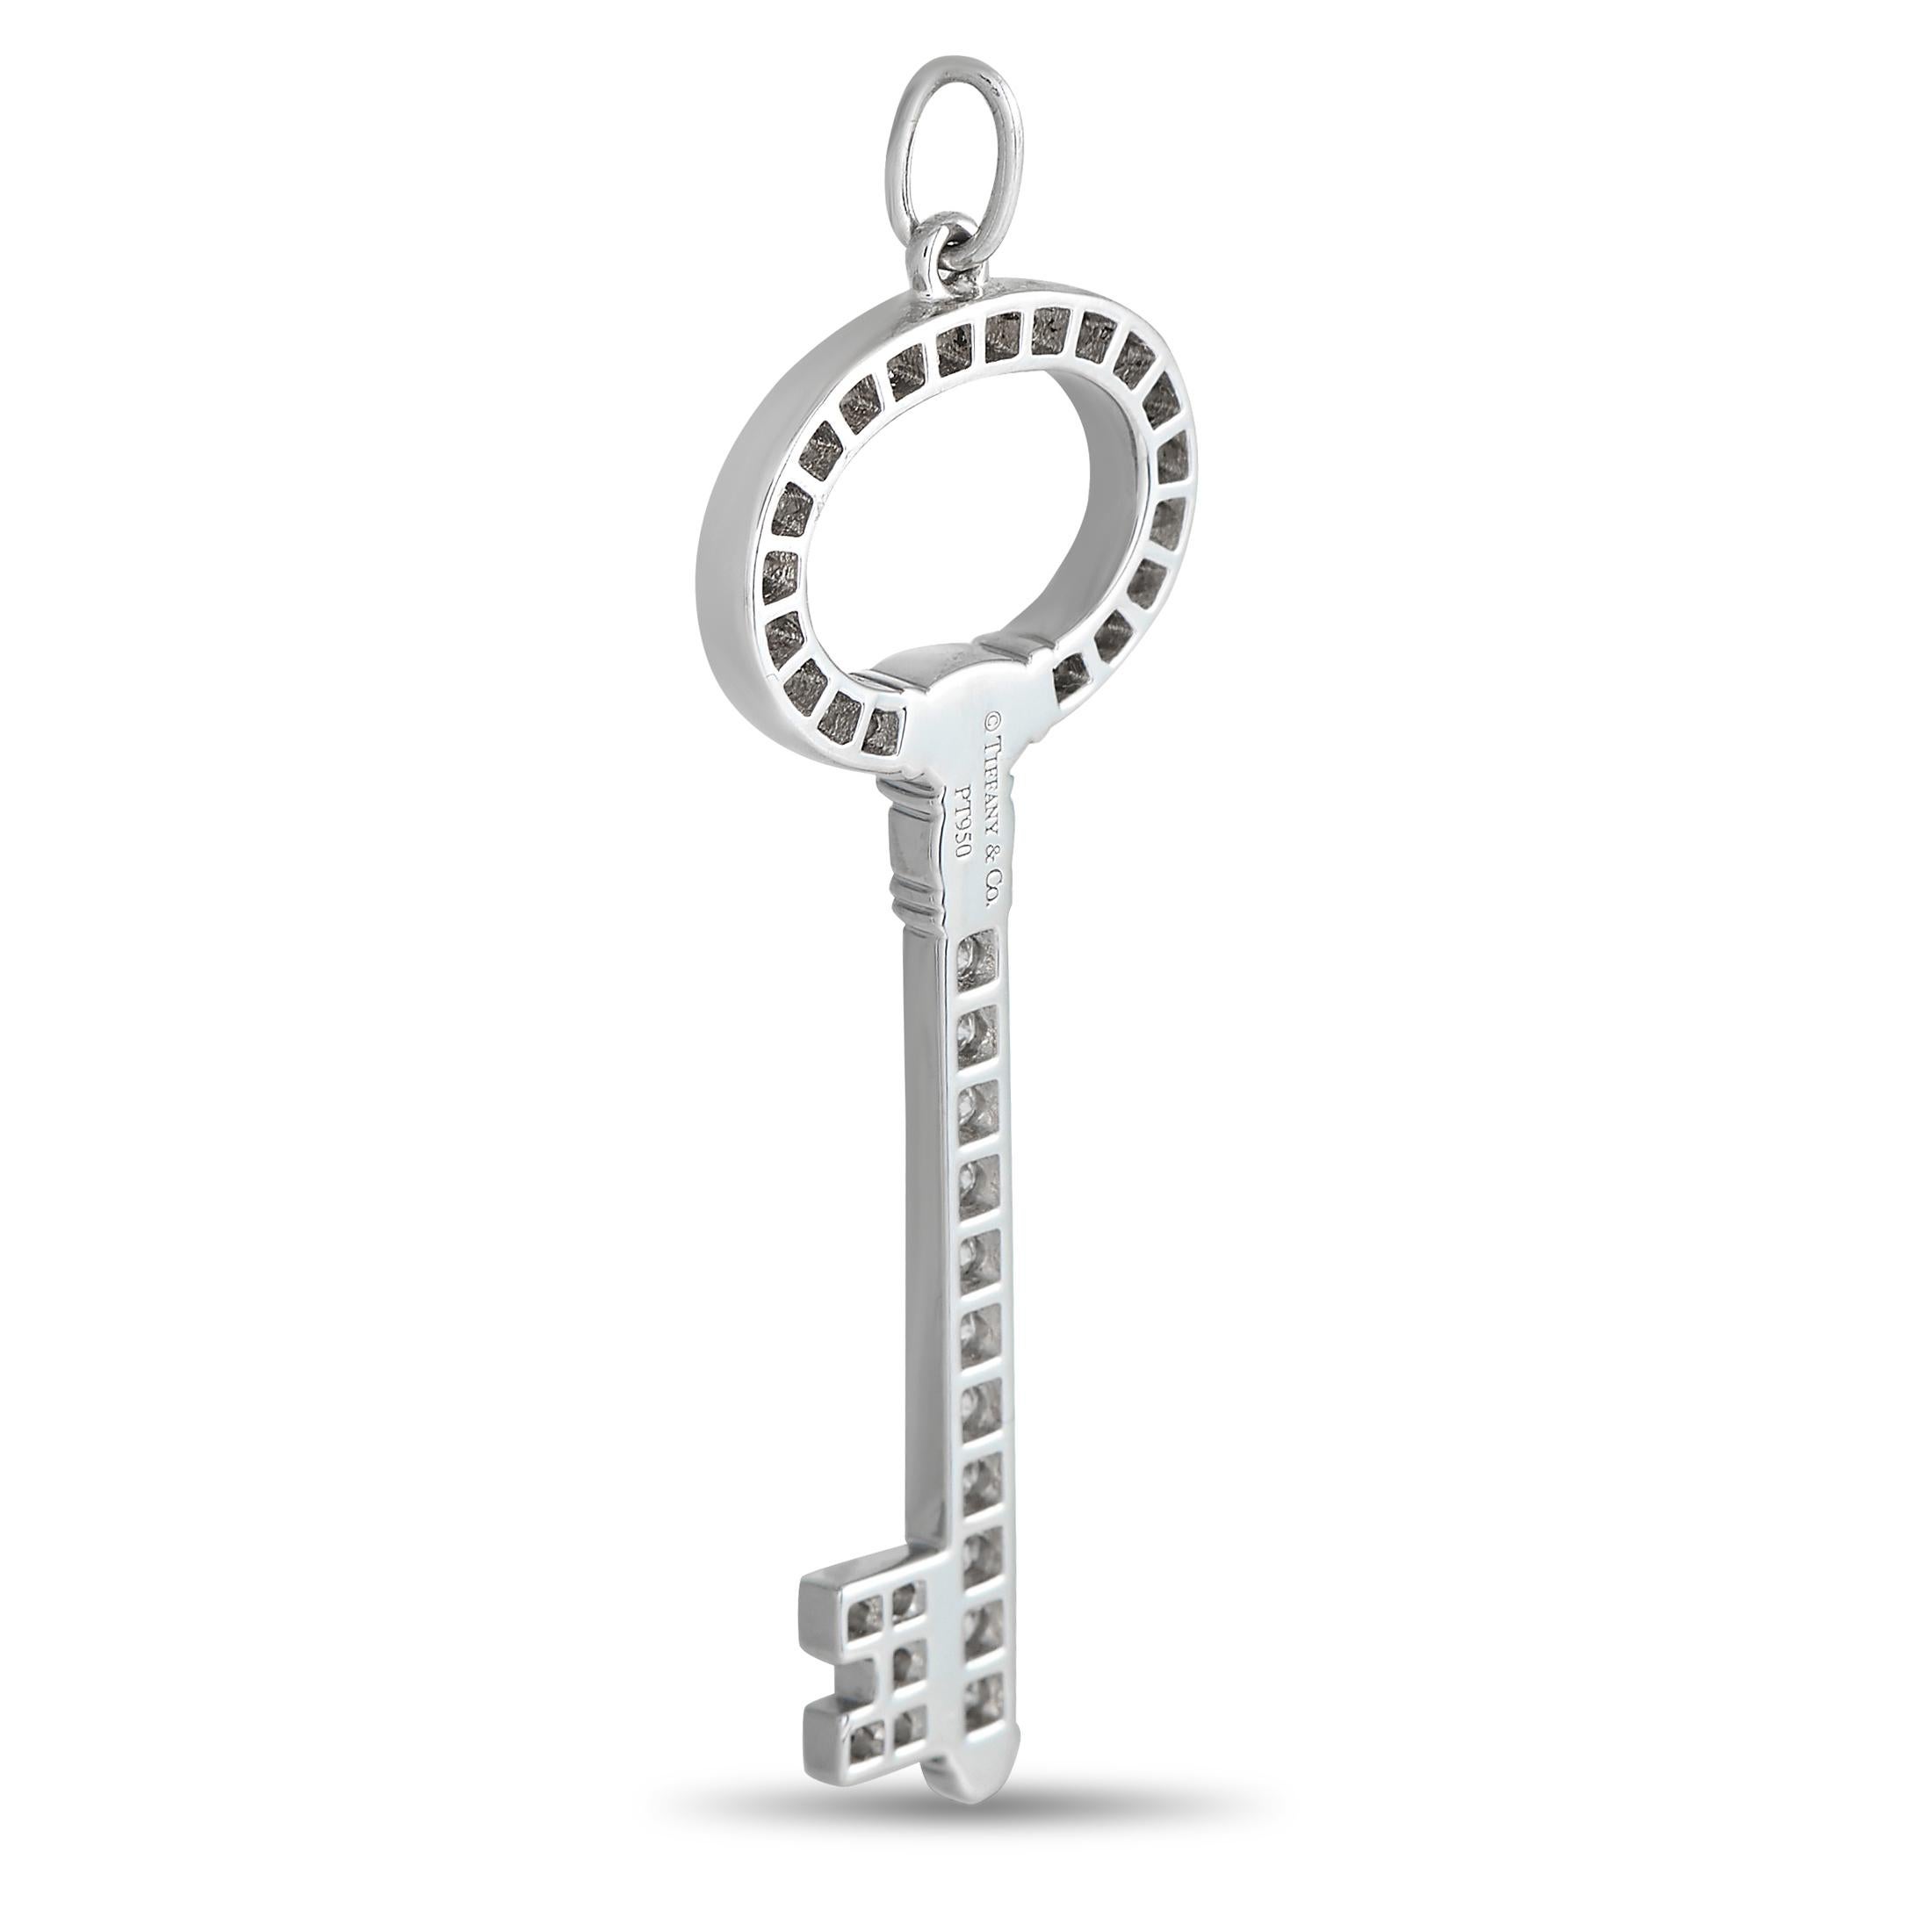 A modern yet timeless Tiffany key in enduring platinum. This jewel was first introduced in 2009 to represent the brand's vision of infinite possibilities. This platinum pendant is shaped like a vintage skeleton key with an oval bow.  The pendant